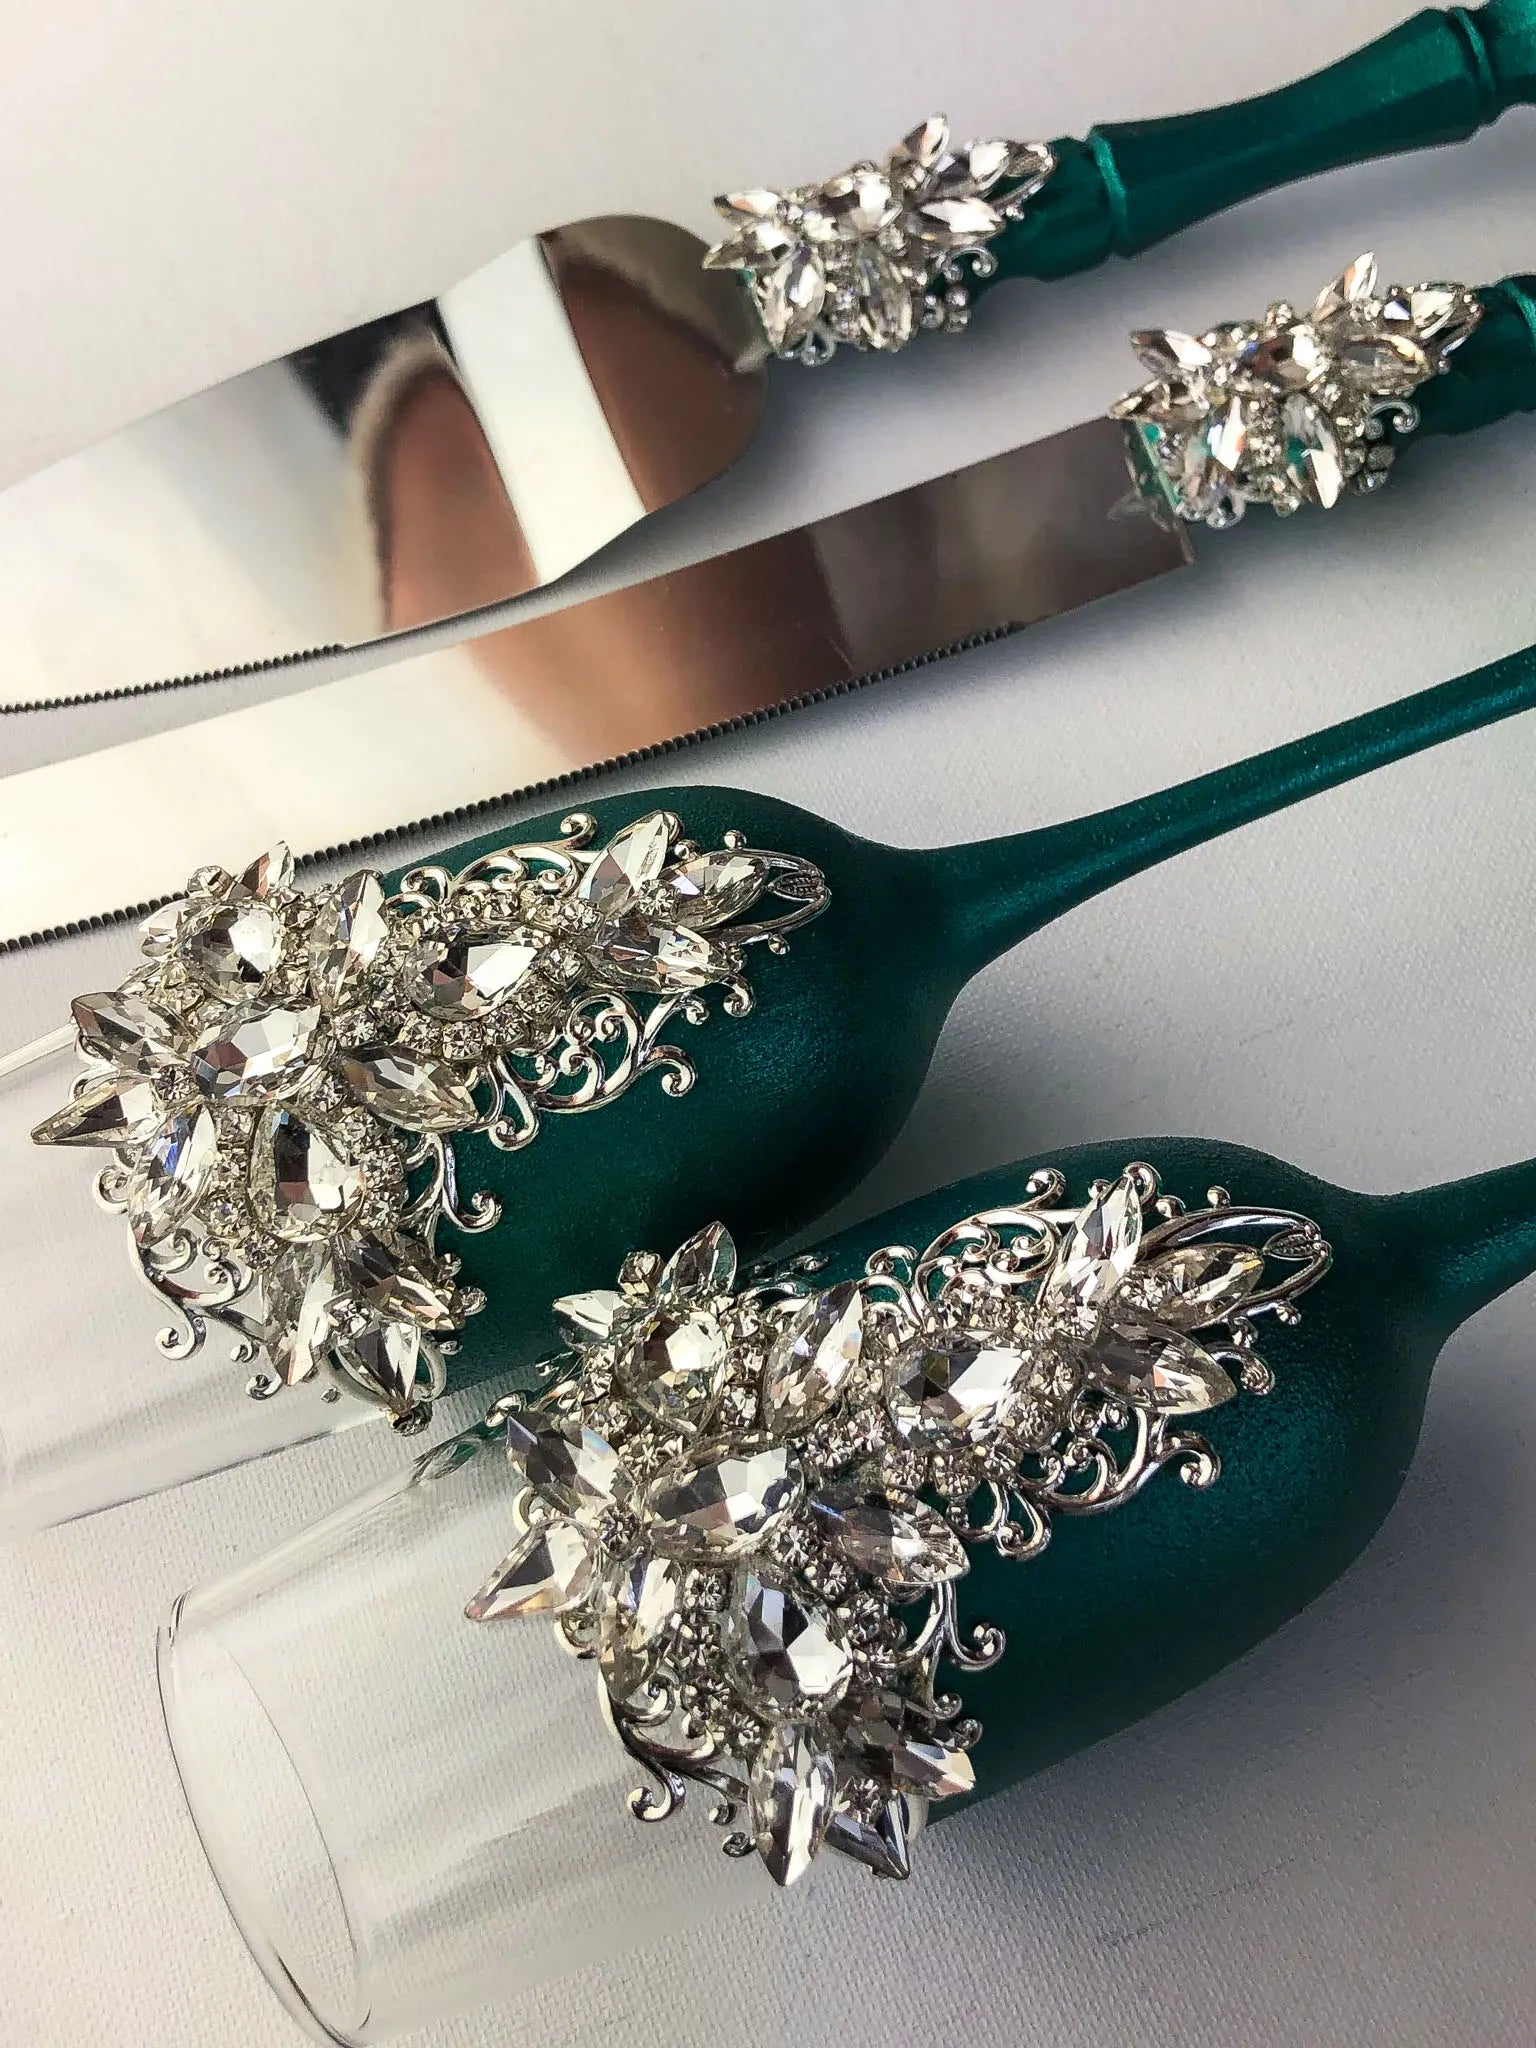 Exquisite Emerald Metallic Champagne Glasses and Cake Serving Set